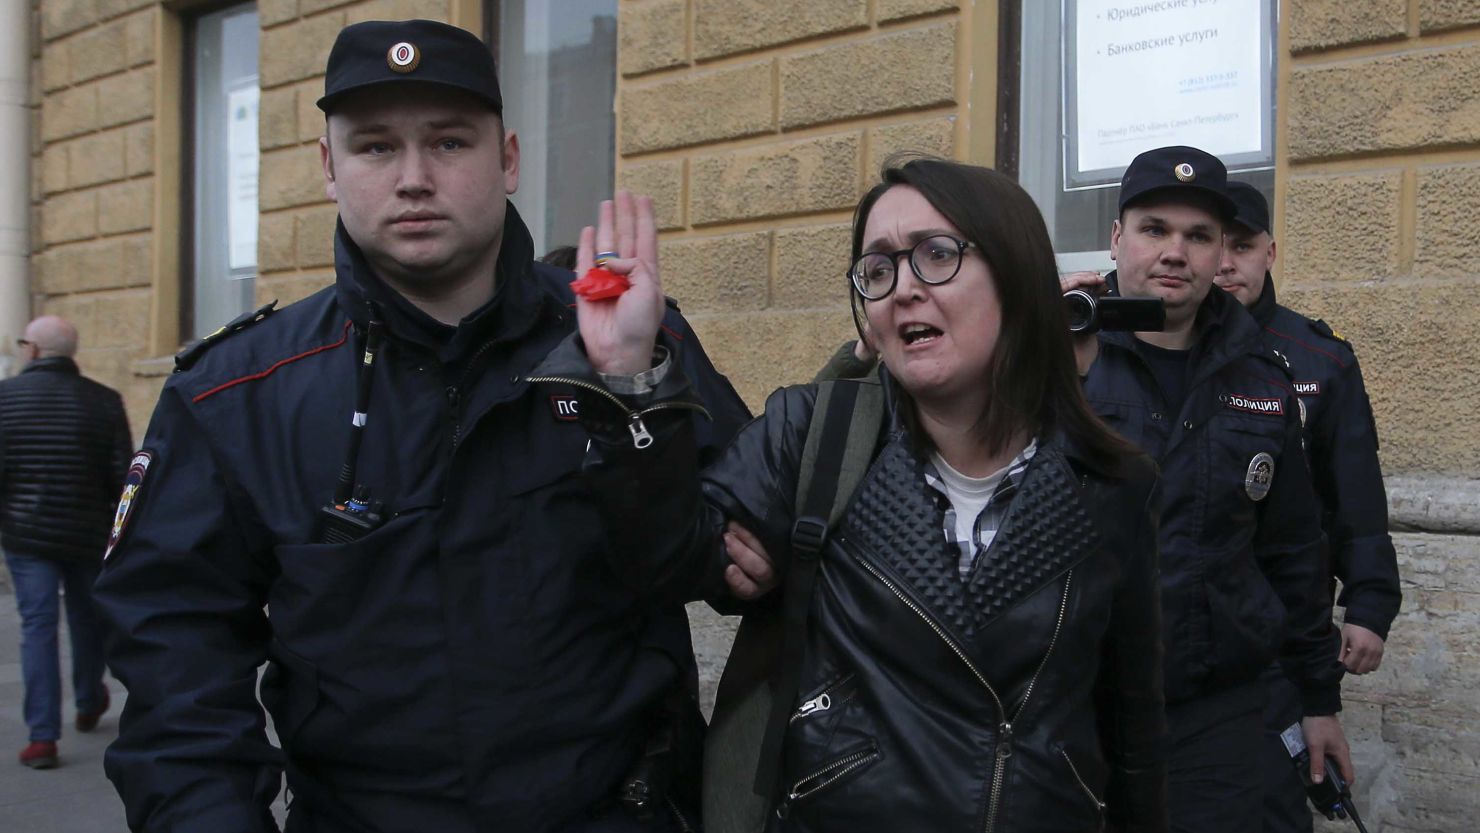 Police officers detain Yelena Grigoryeva during a rally held by LGBTQ activists in St. Petersburg in April.